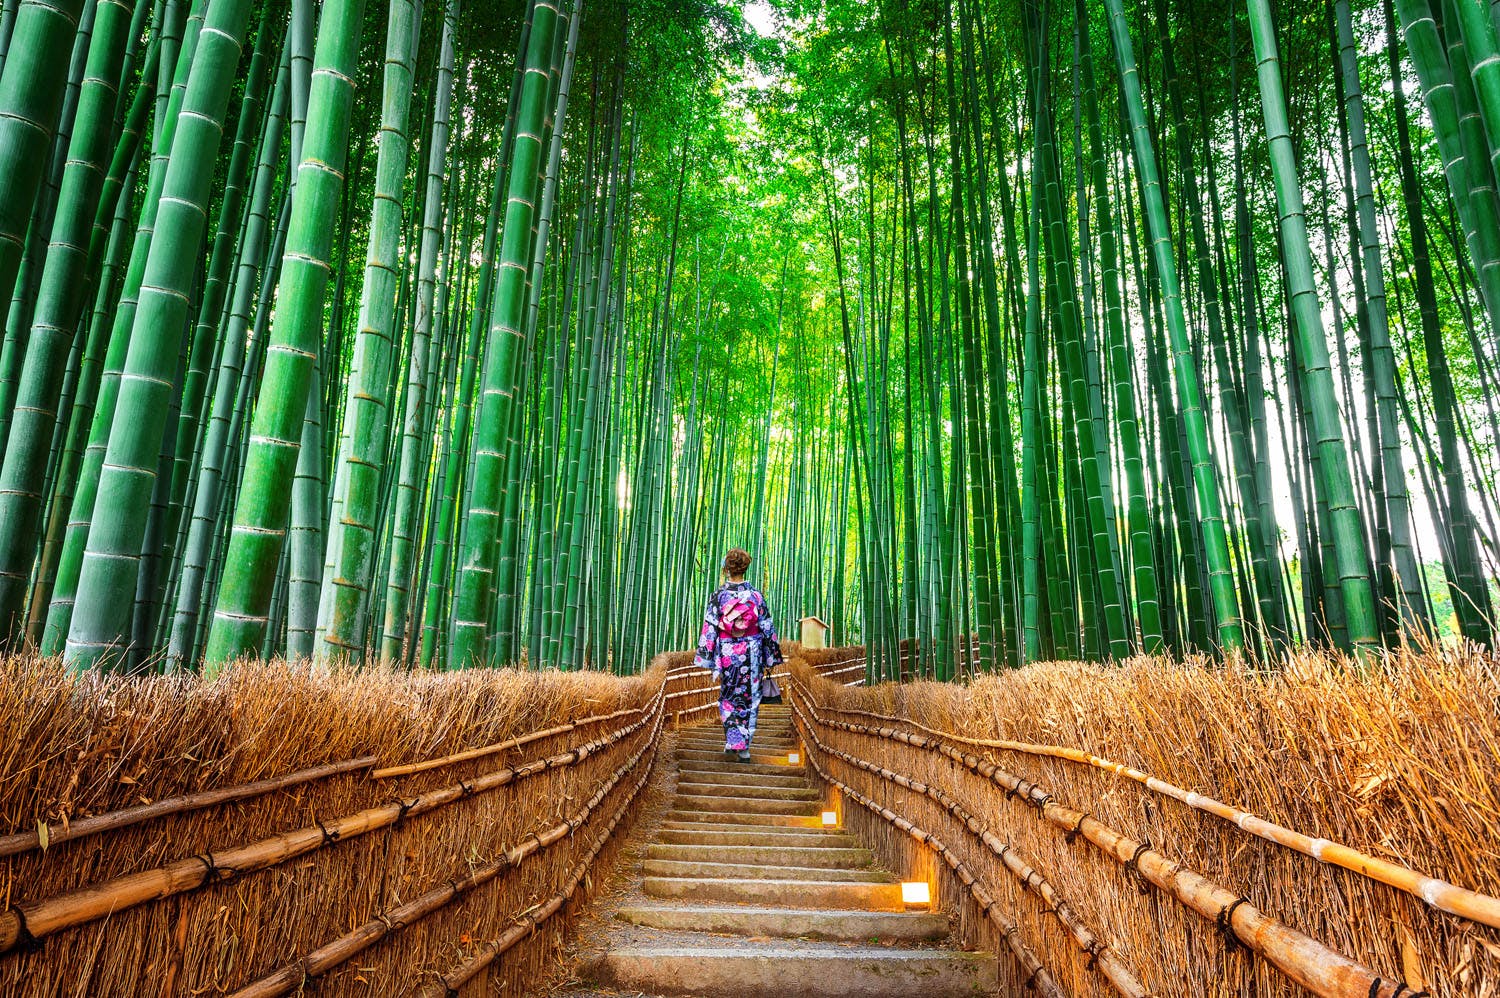 kyoto - woman walking in bamboo forest wearing traditional kimono